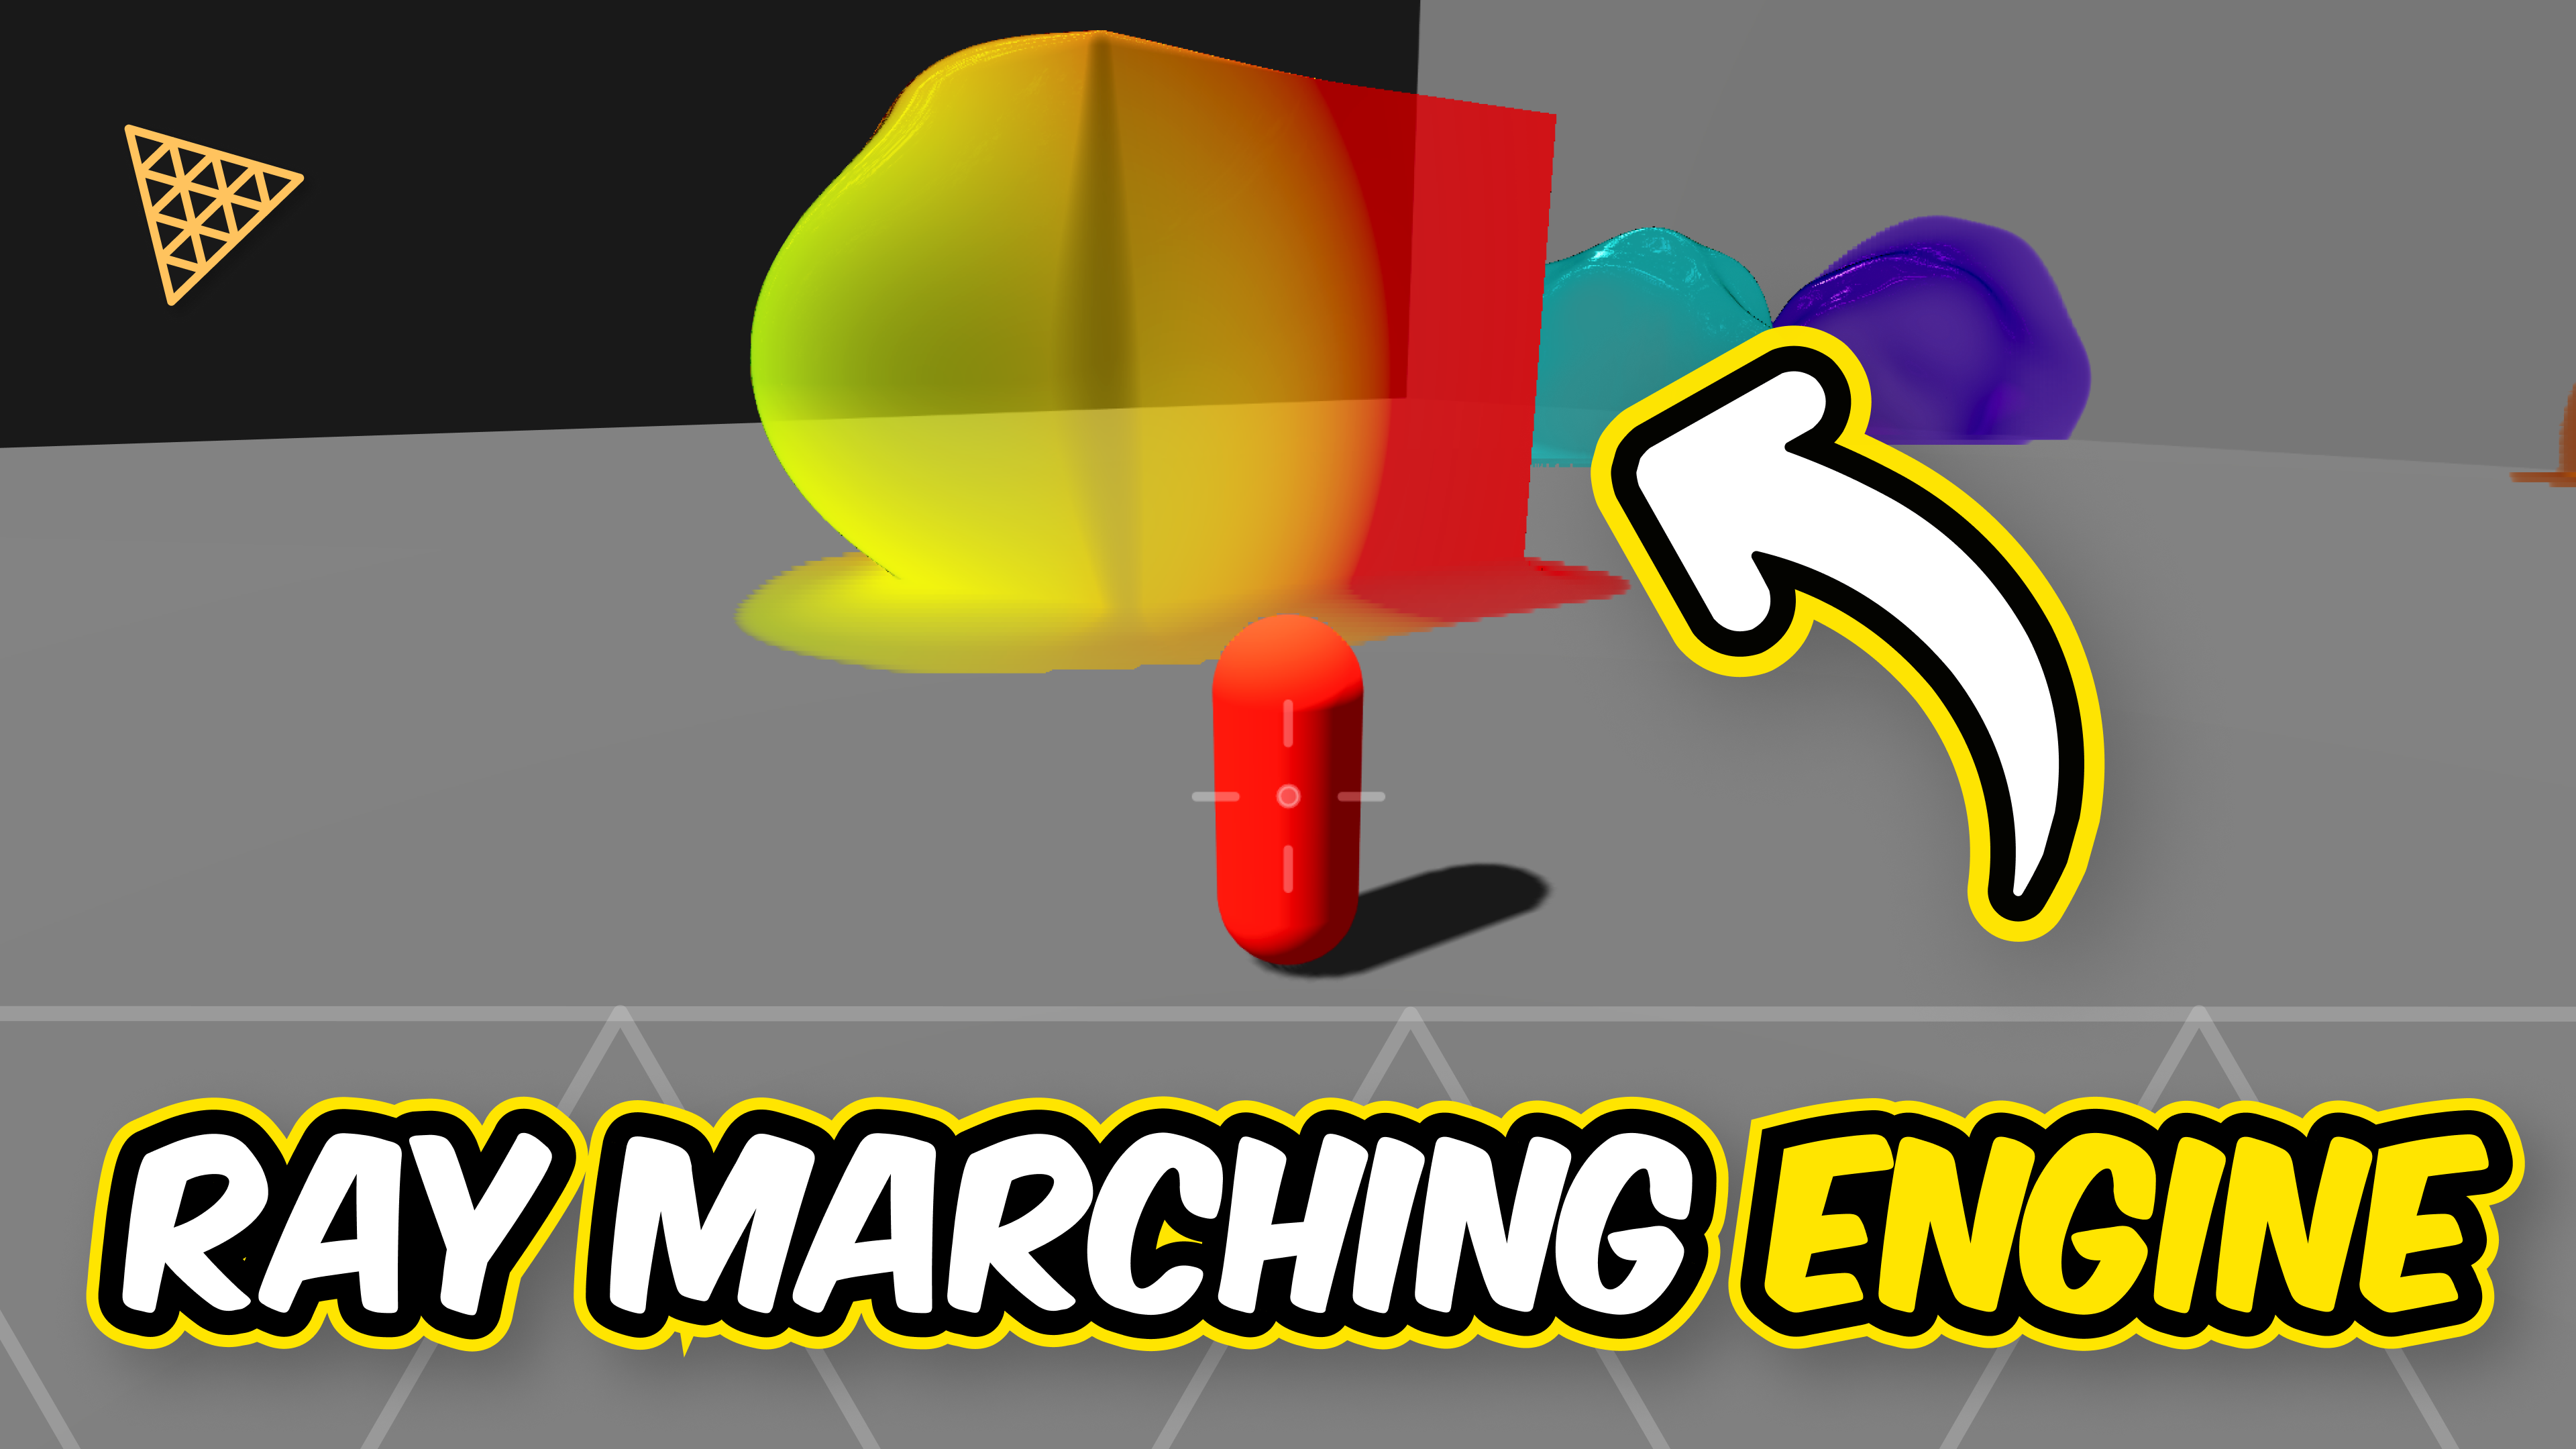 Raymarching Engine Video